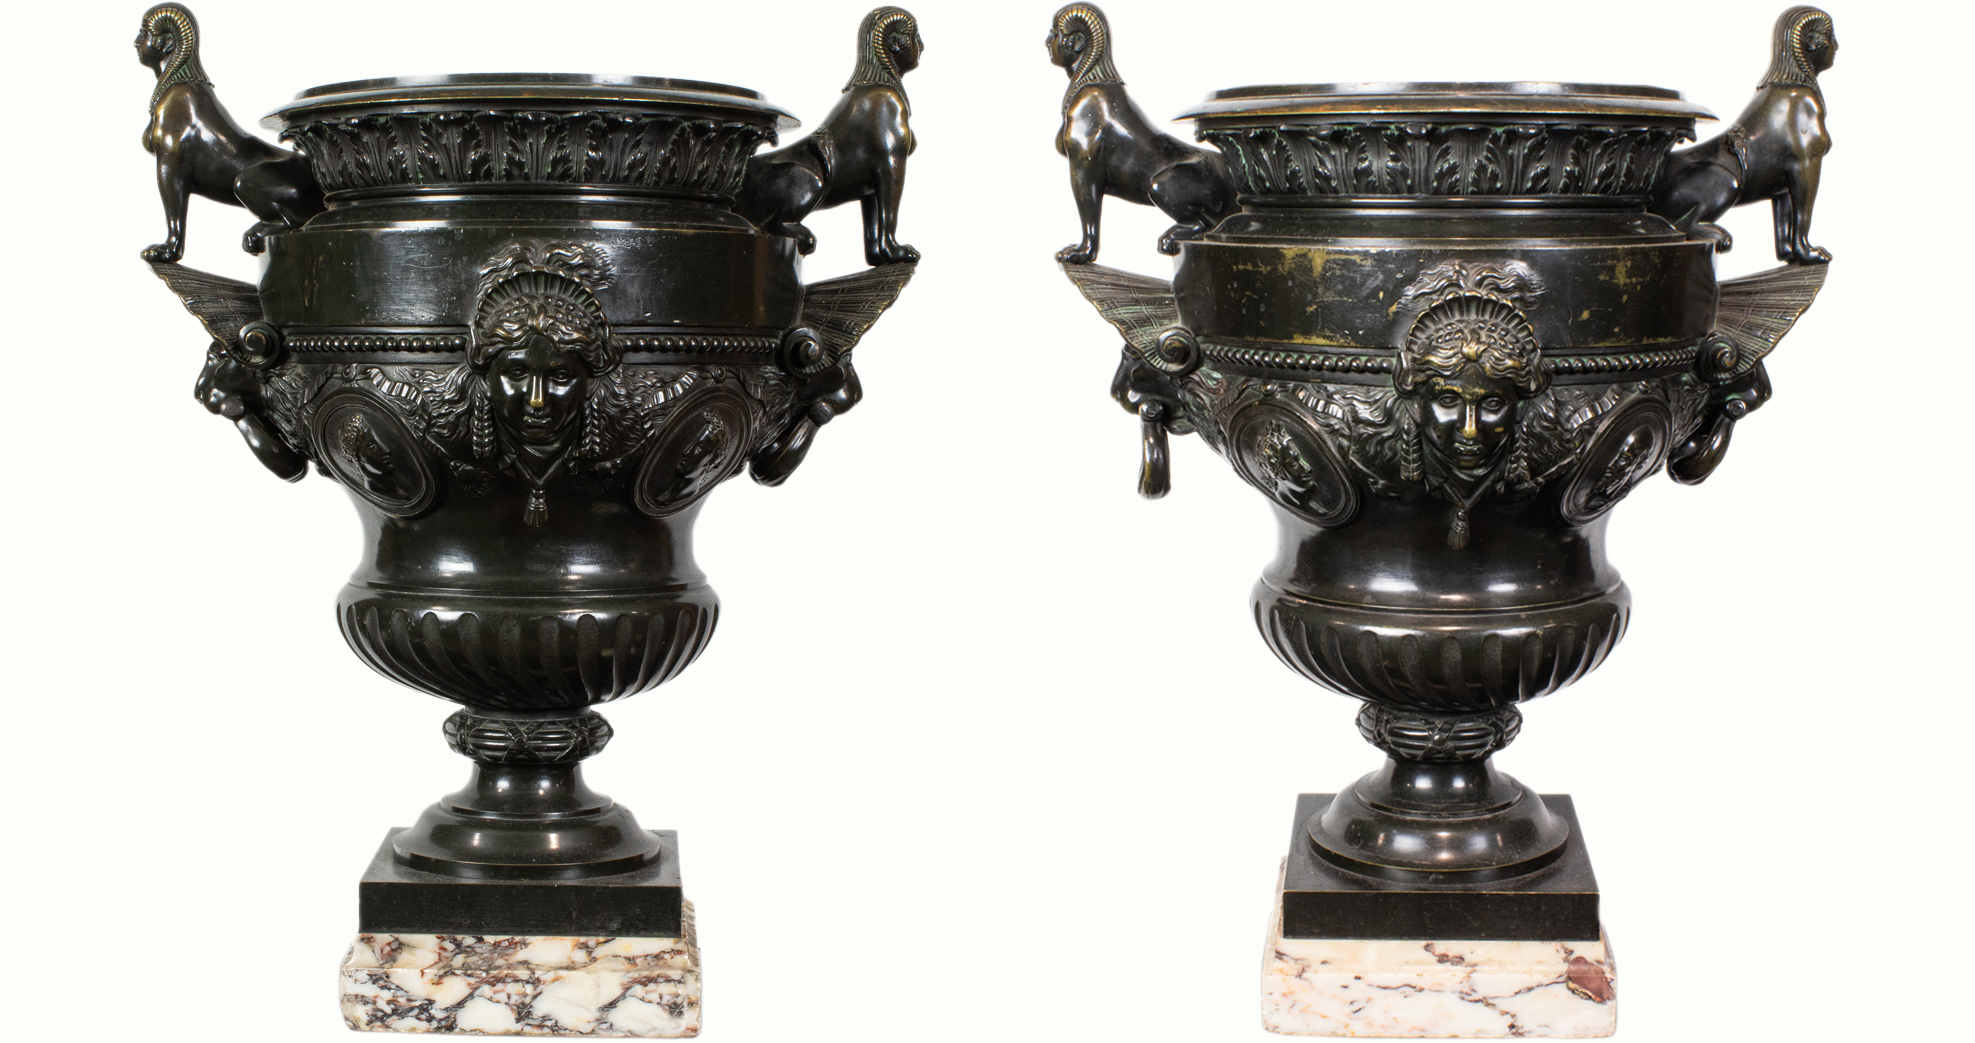 A large pair of Egyptian Revival patinated bronze two-handled urns, 19th century.